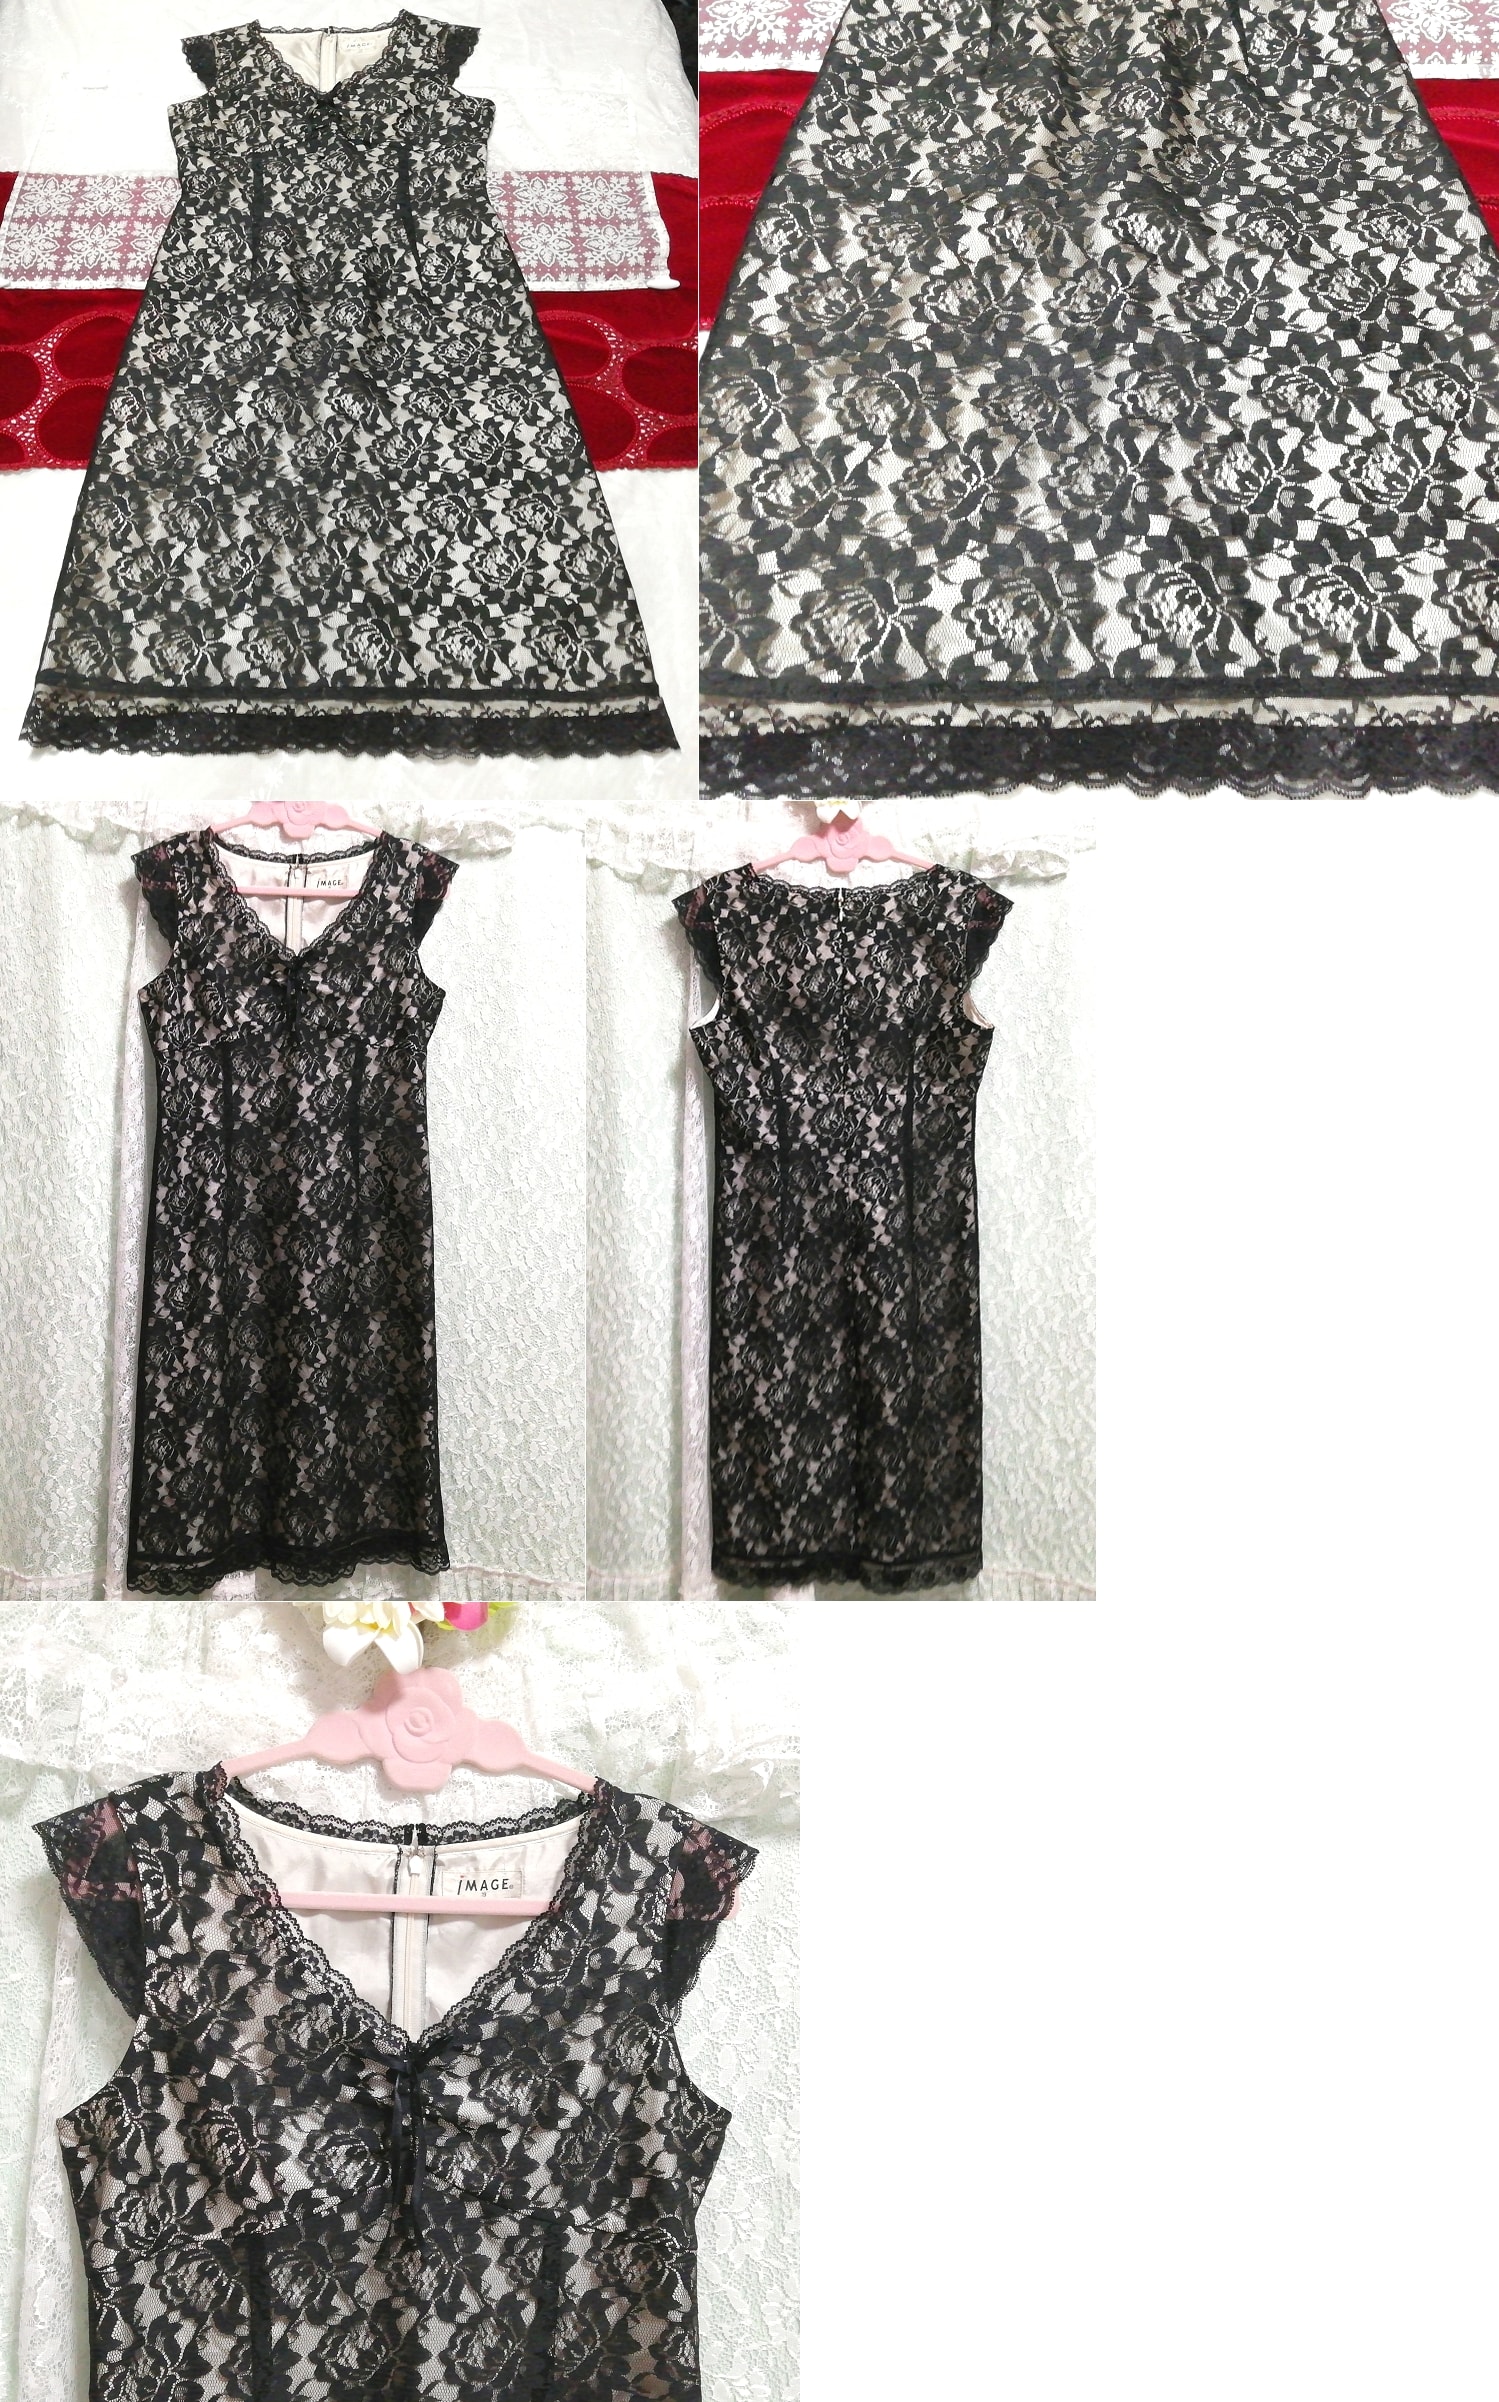 Black rose lace negligee nightgown sleeveless one piece dress, knee length skirt, m size